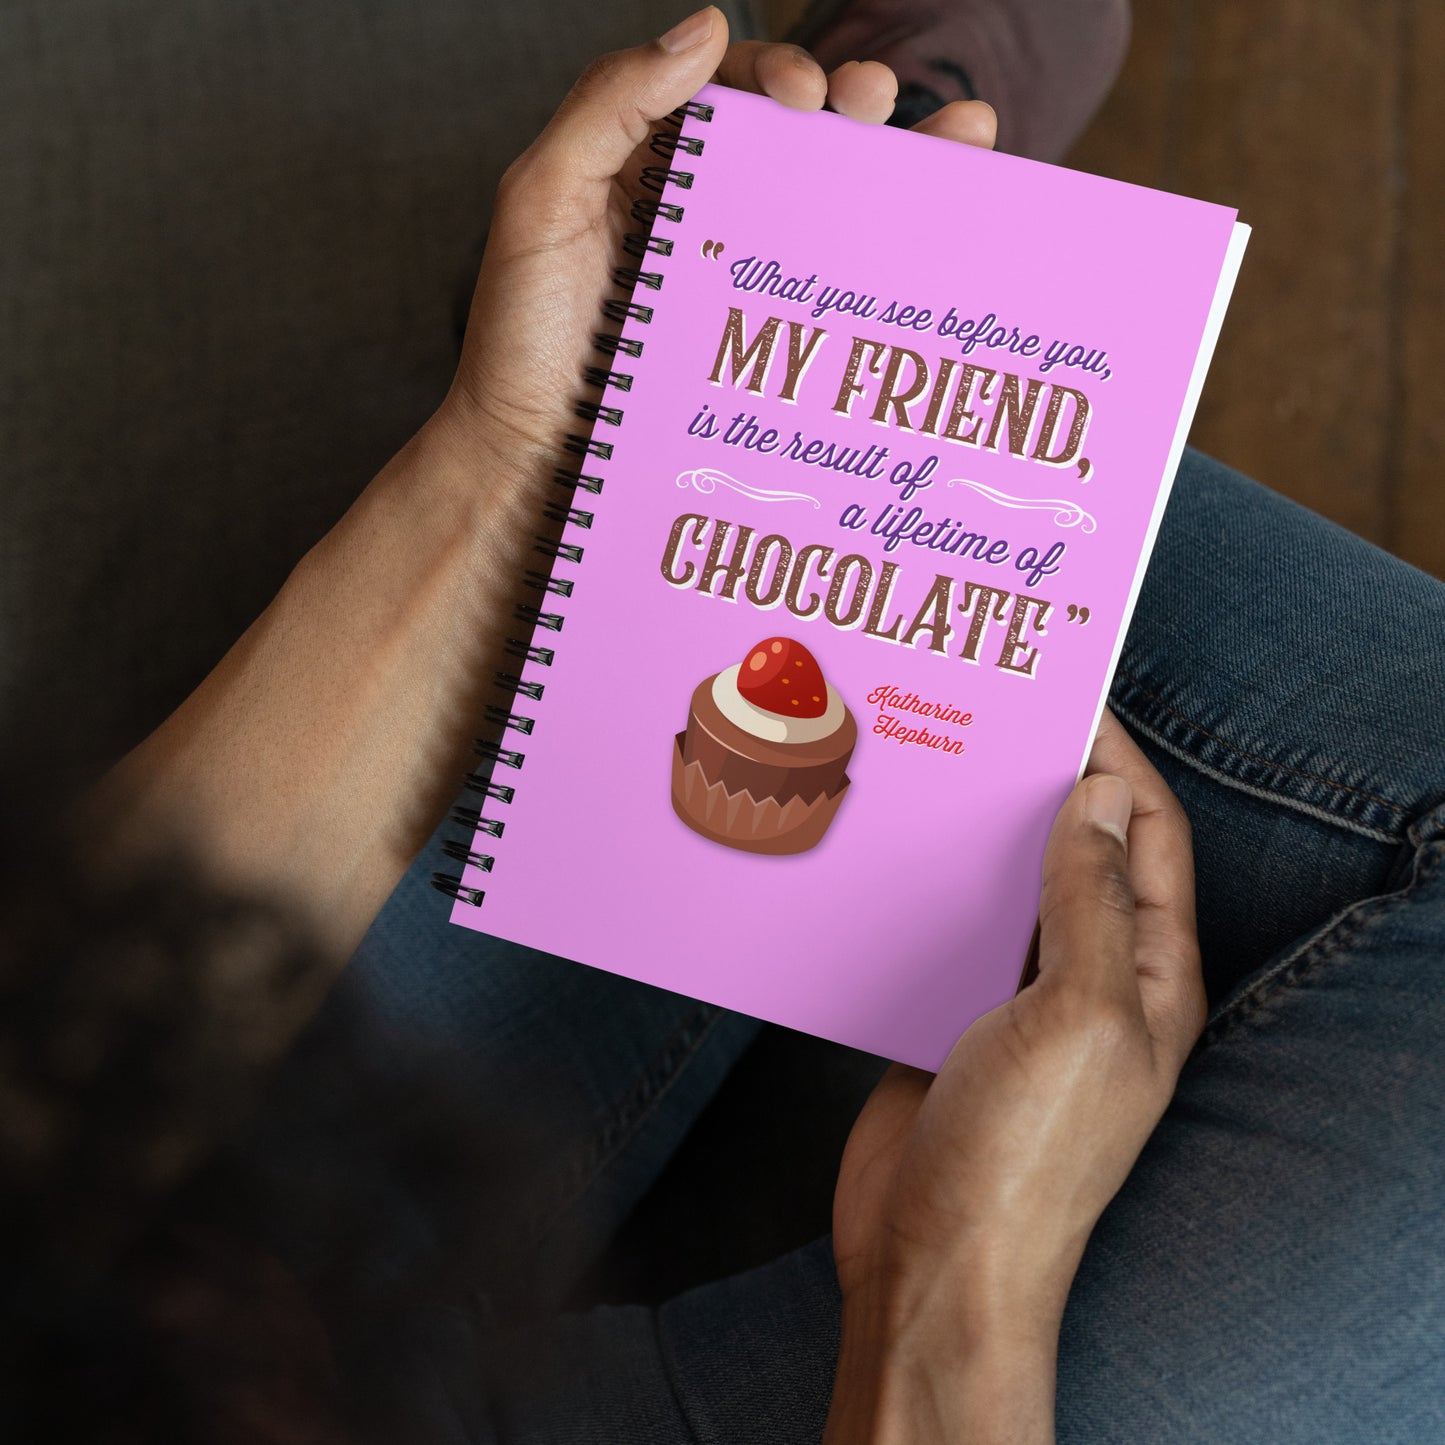 Lifetime of Chocolate Spiral notebook